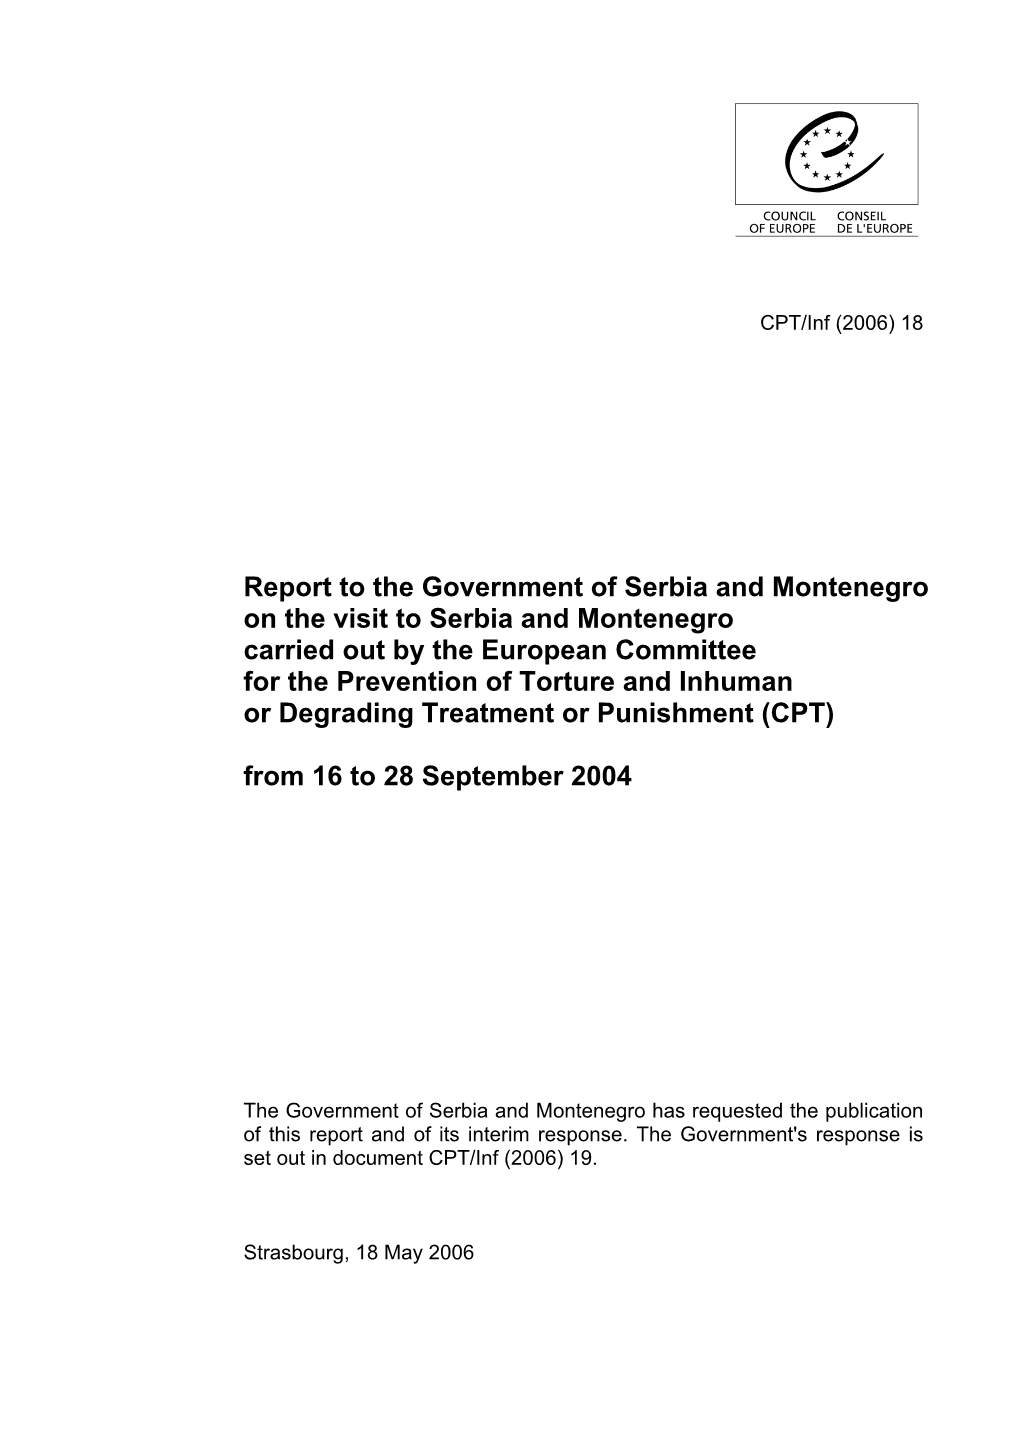 Report to the Government of Serbia and Montenegro on the Visit To